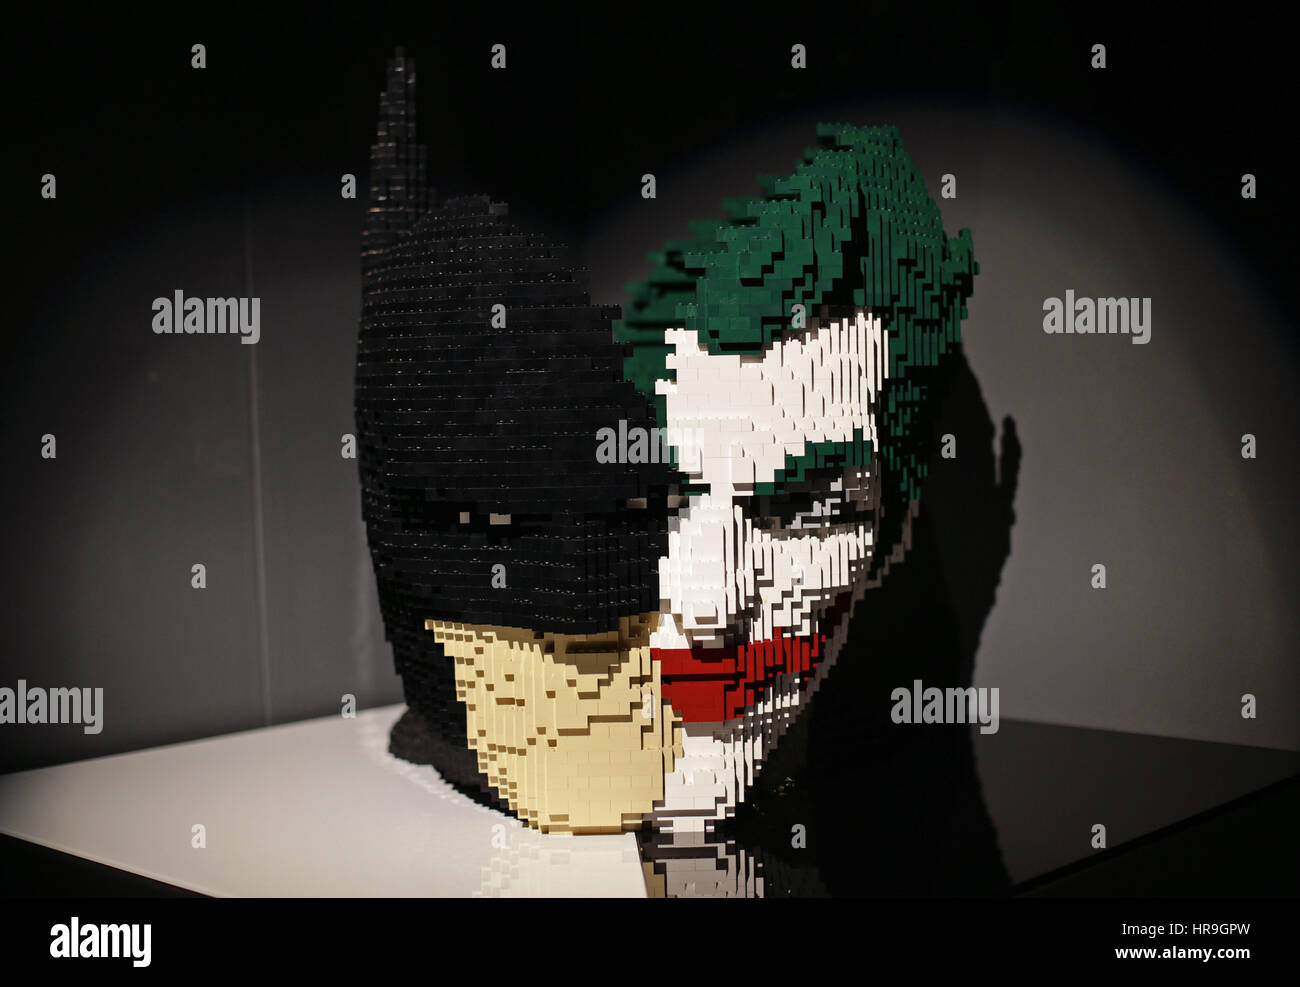 A model of Batman and The Joker's face intertwined on display, during ...